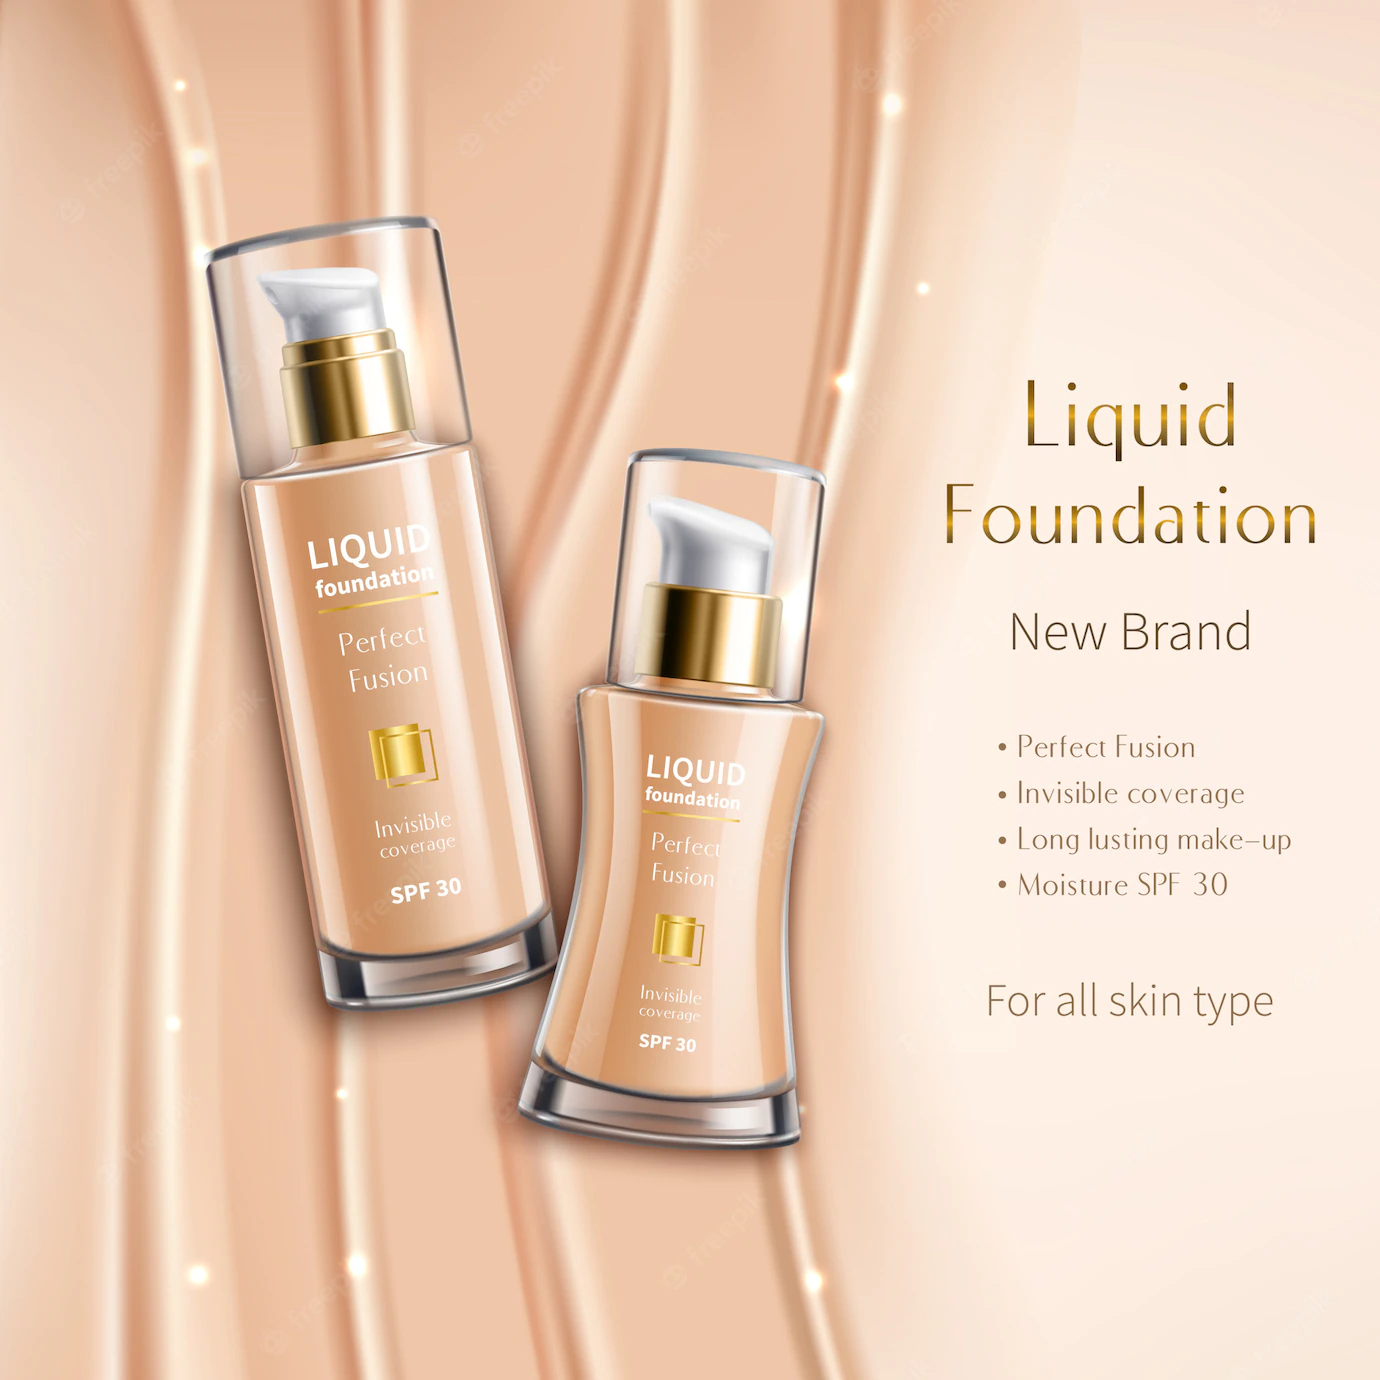 Realistic Liquid Foundation Glass Vials Advertising Composition Cosmetics Product Beige Sparkling 1284 31849